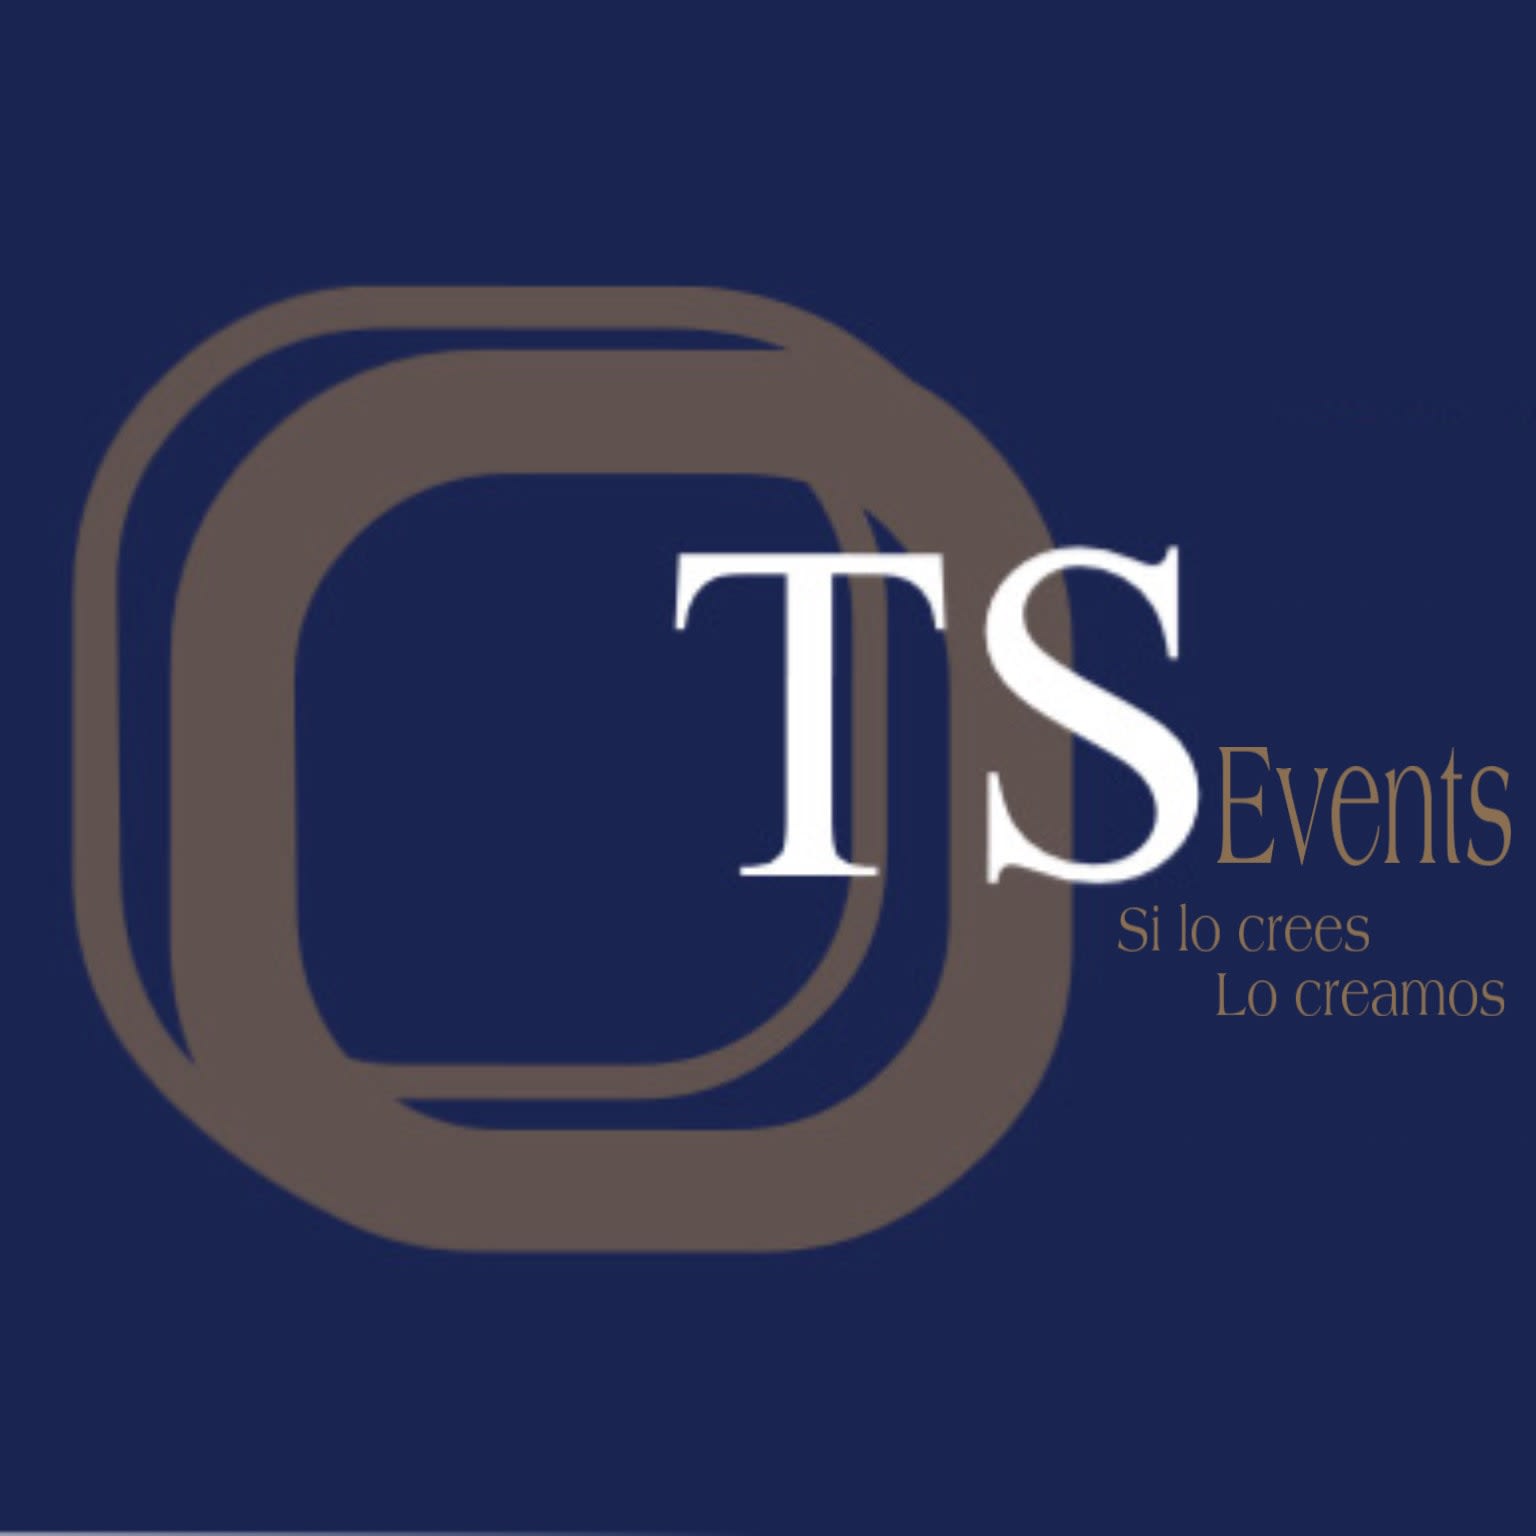 TS Events